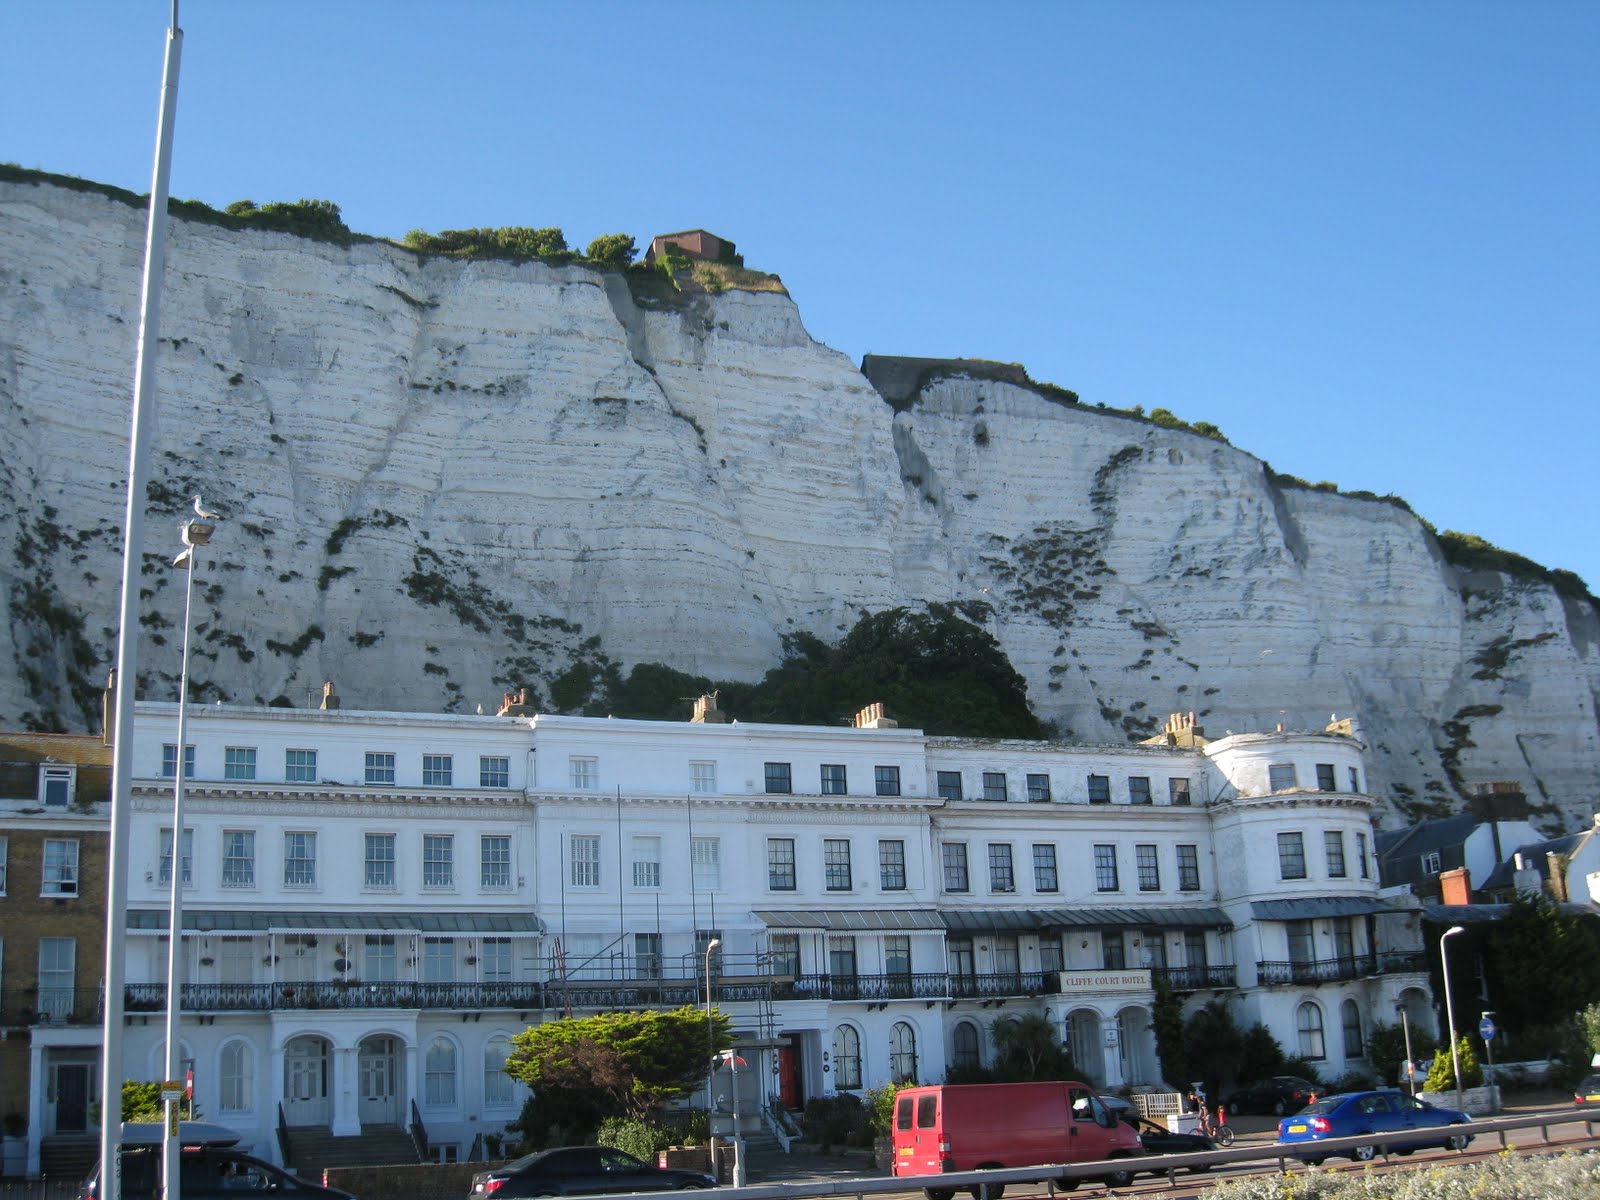 Make it count: Day #130 - White Cliffs of Dover